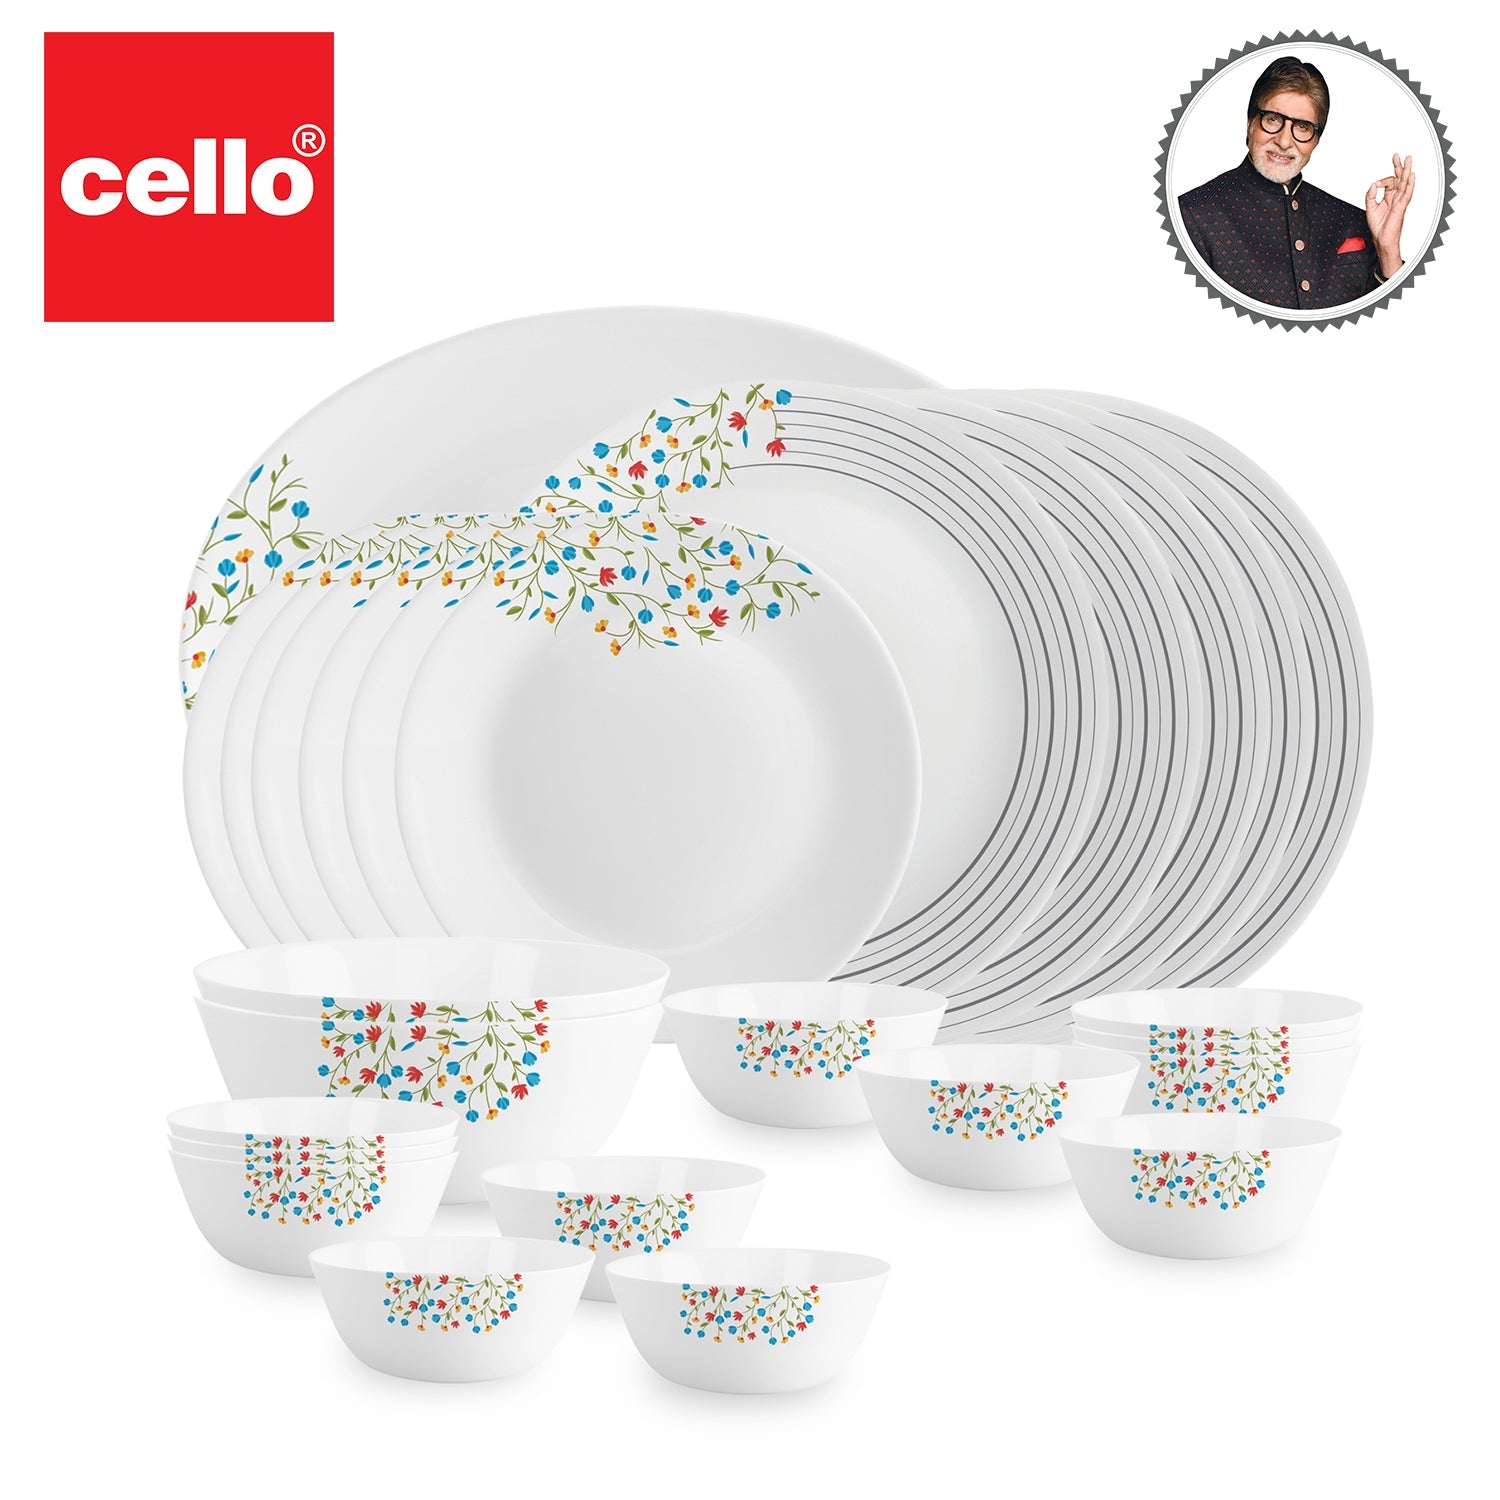 A 27-piece Opalware Dinner set: Plates, bowls, and serveware adorned with delicate floral designs for elegant dining